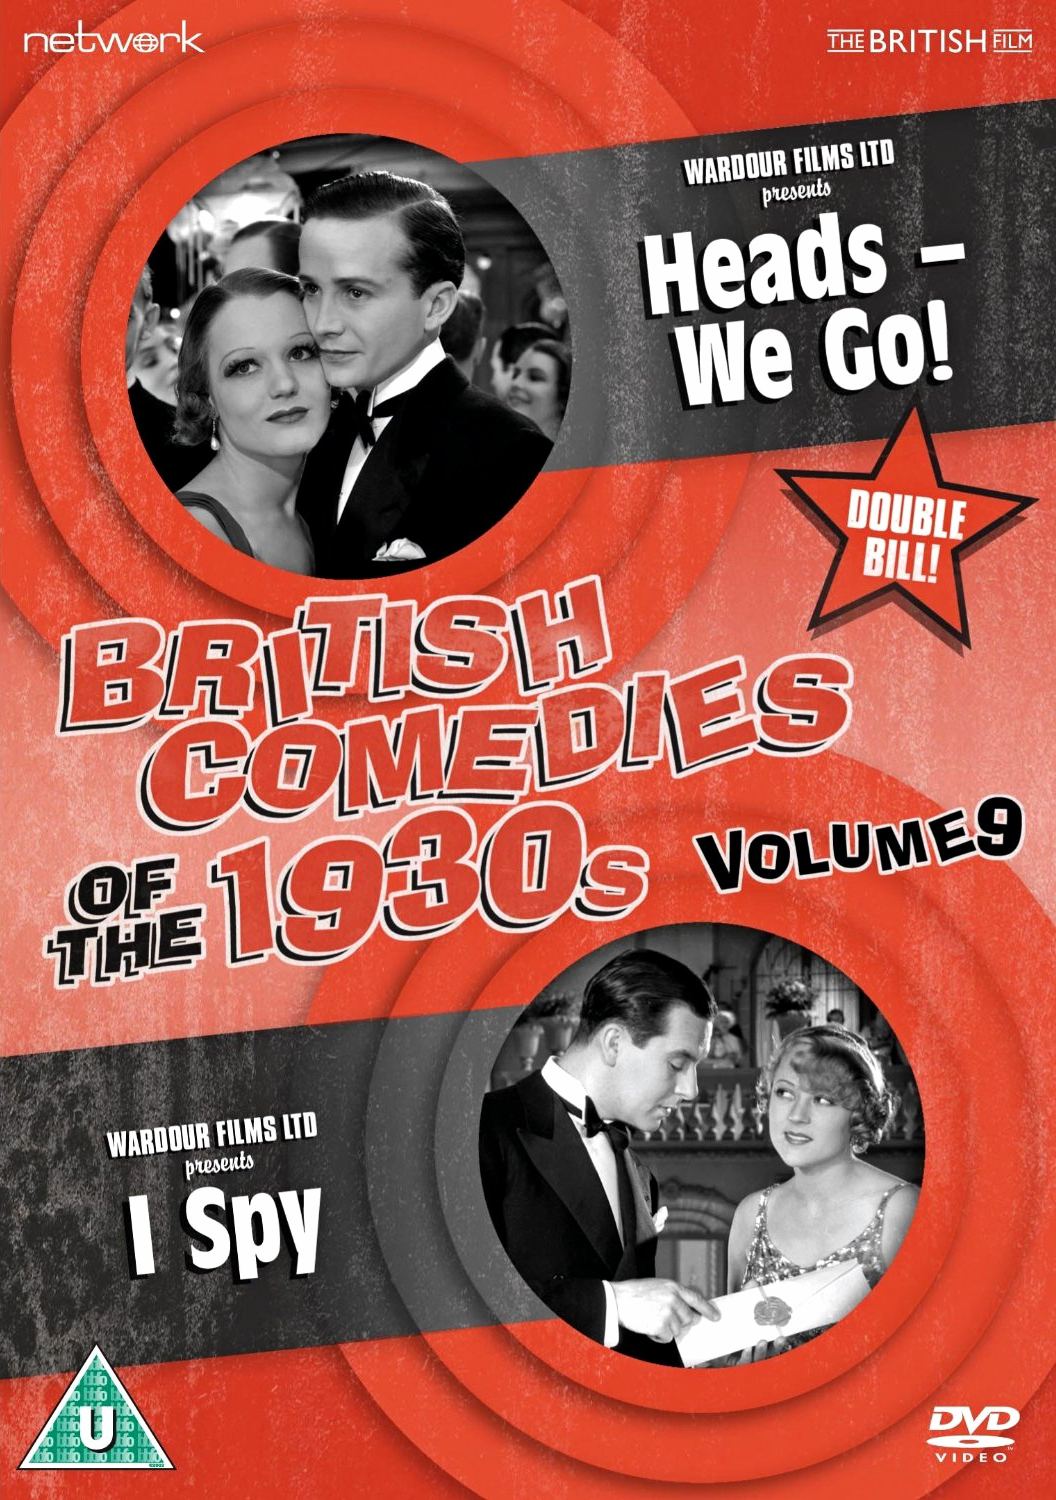 British Comedies of the 1930s Vol 9 DVD from Network and The British Film.  Features Heads We Go (1933) and I Spy (1934).